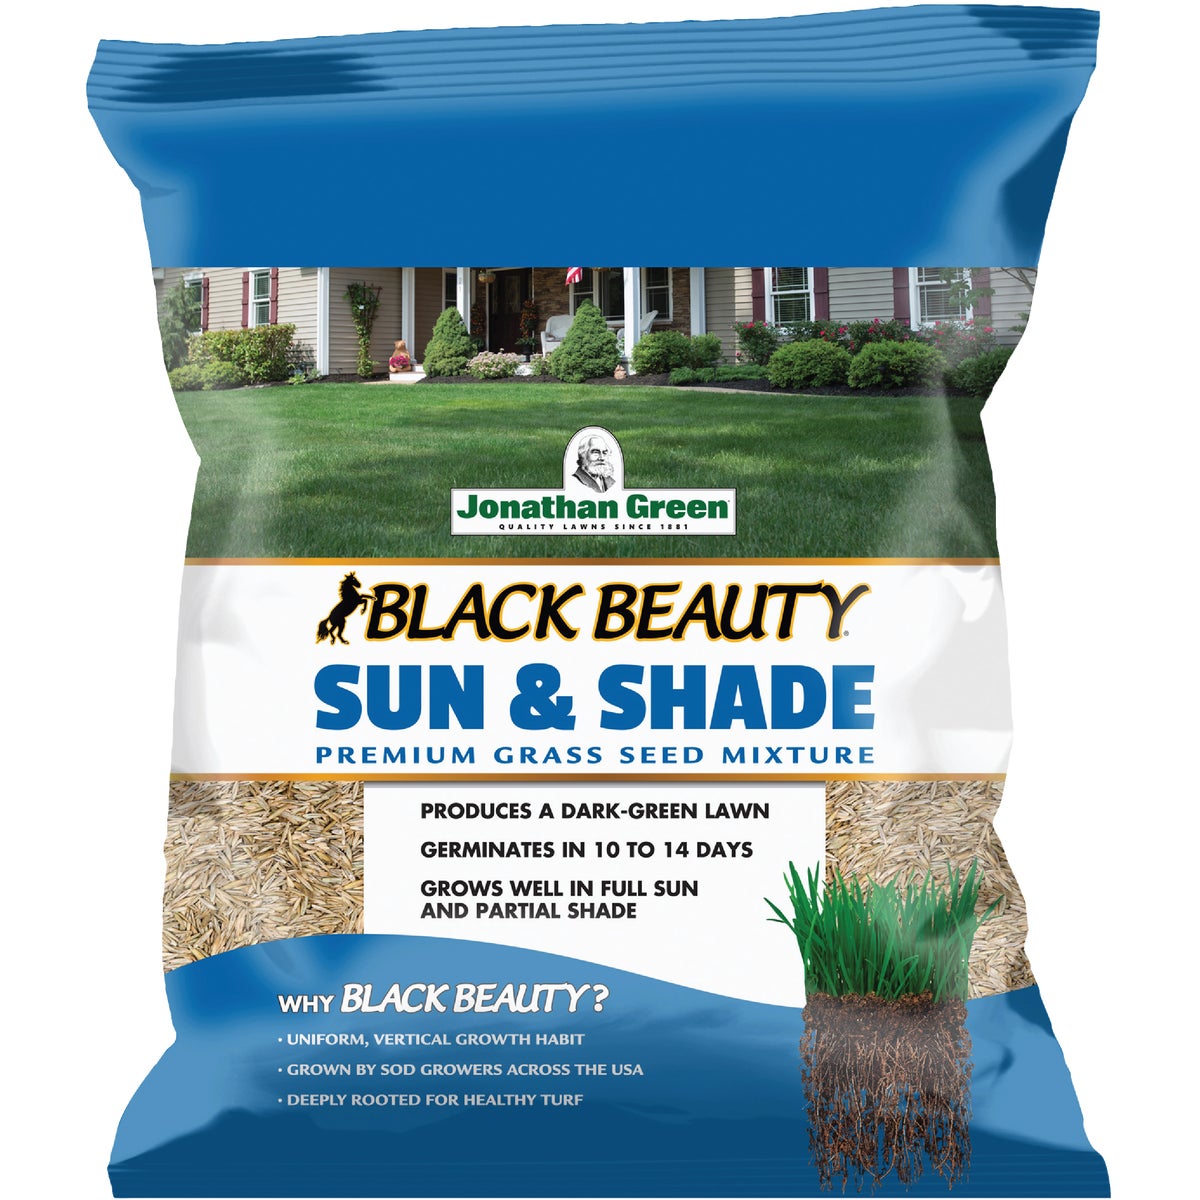 Item 703517, Grass seed mix that grows well in full sun and partial shade areas.